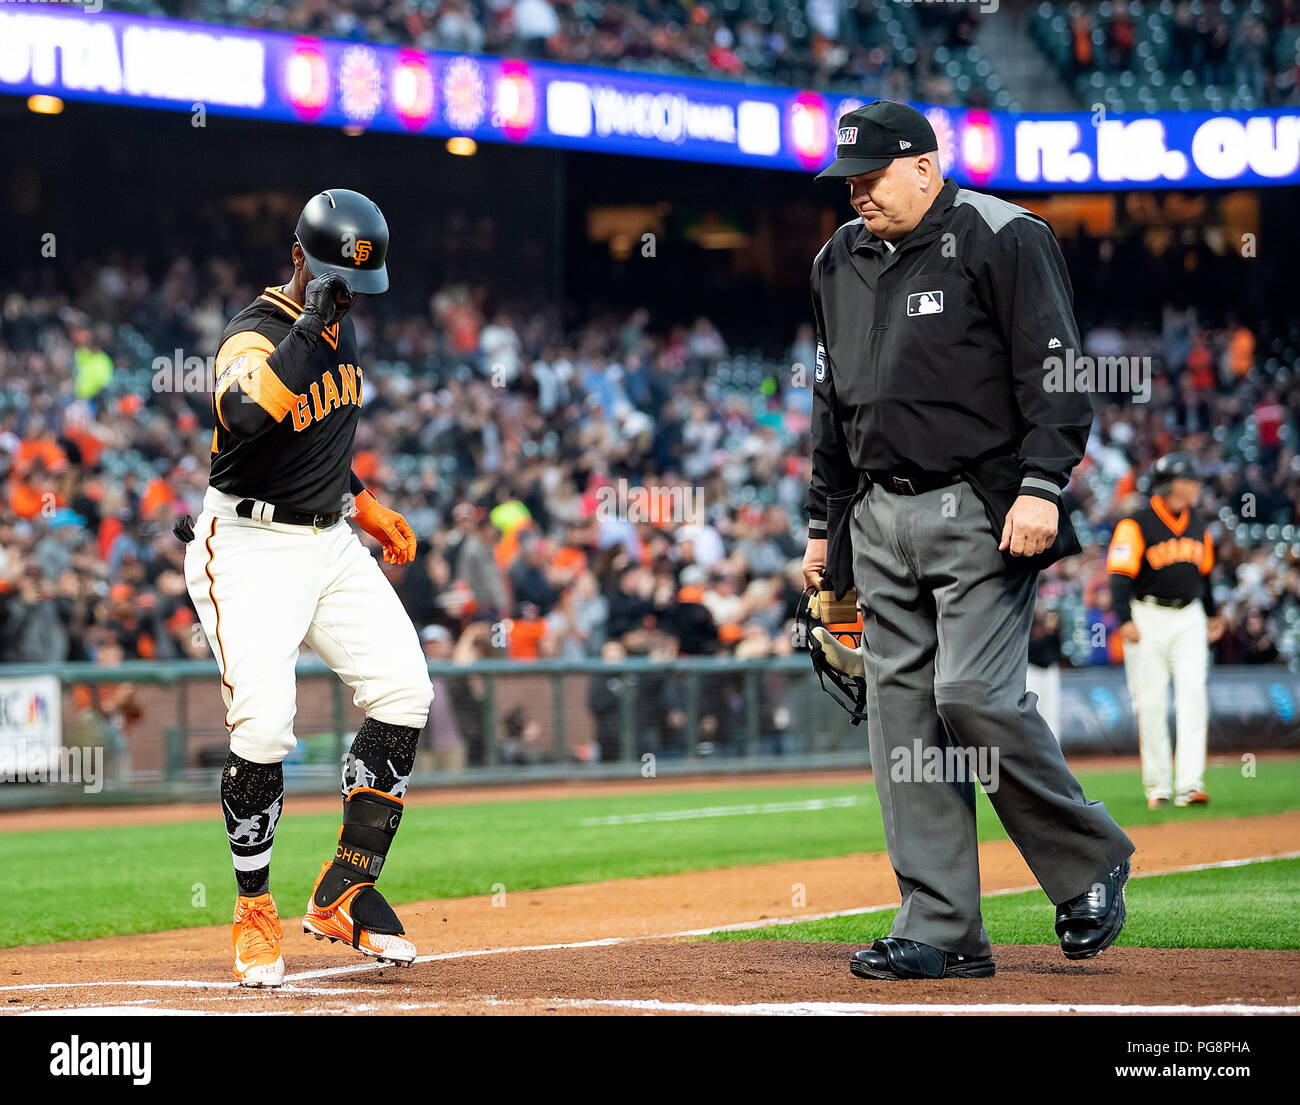 San Francisco, USA. August 24, 2018: San Francisco Giants right fielder Andrew McCutchen (22) celebrates a lead off home run as umpire Jeff Nelson looks on, during a MLB game between the Texas Rangers and the San Francisco Giants at AT&T Park in San Francisco, California. Valerie Shoaps/CSM Credit: Cal Sport Media/Alamy Live News Stock Photo